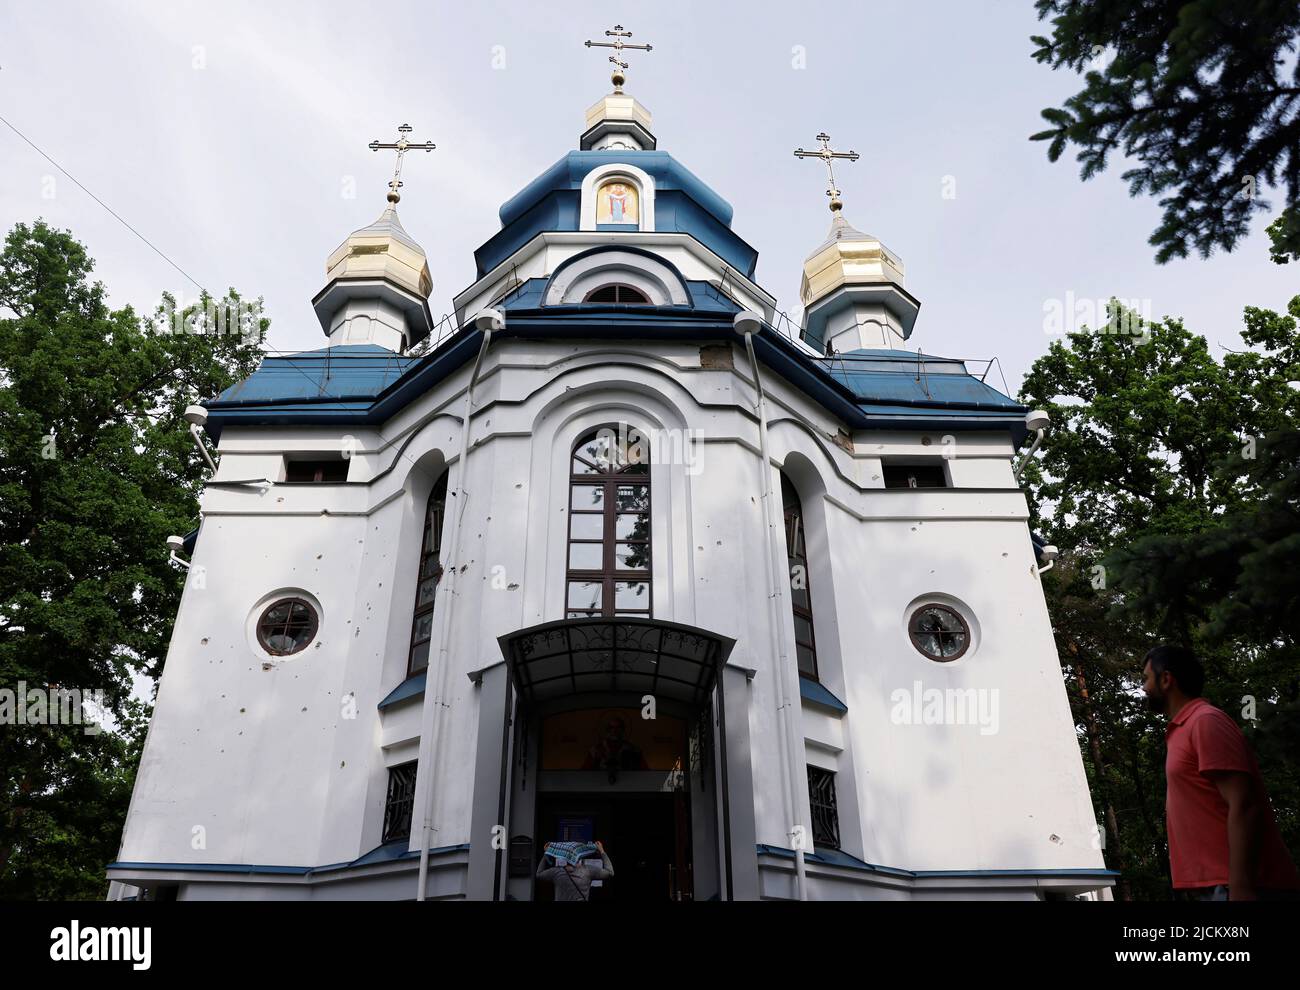 A view of Saint Nicholas church, pockmarked with shrapnel and bullet holes, as Russia's attack on Ukraine continues, in Irpin, Kyiv region, Ukraine June 4, 2022. Picture taken June 4, 2022.  REUTERS/Edgar Su Stock Photo